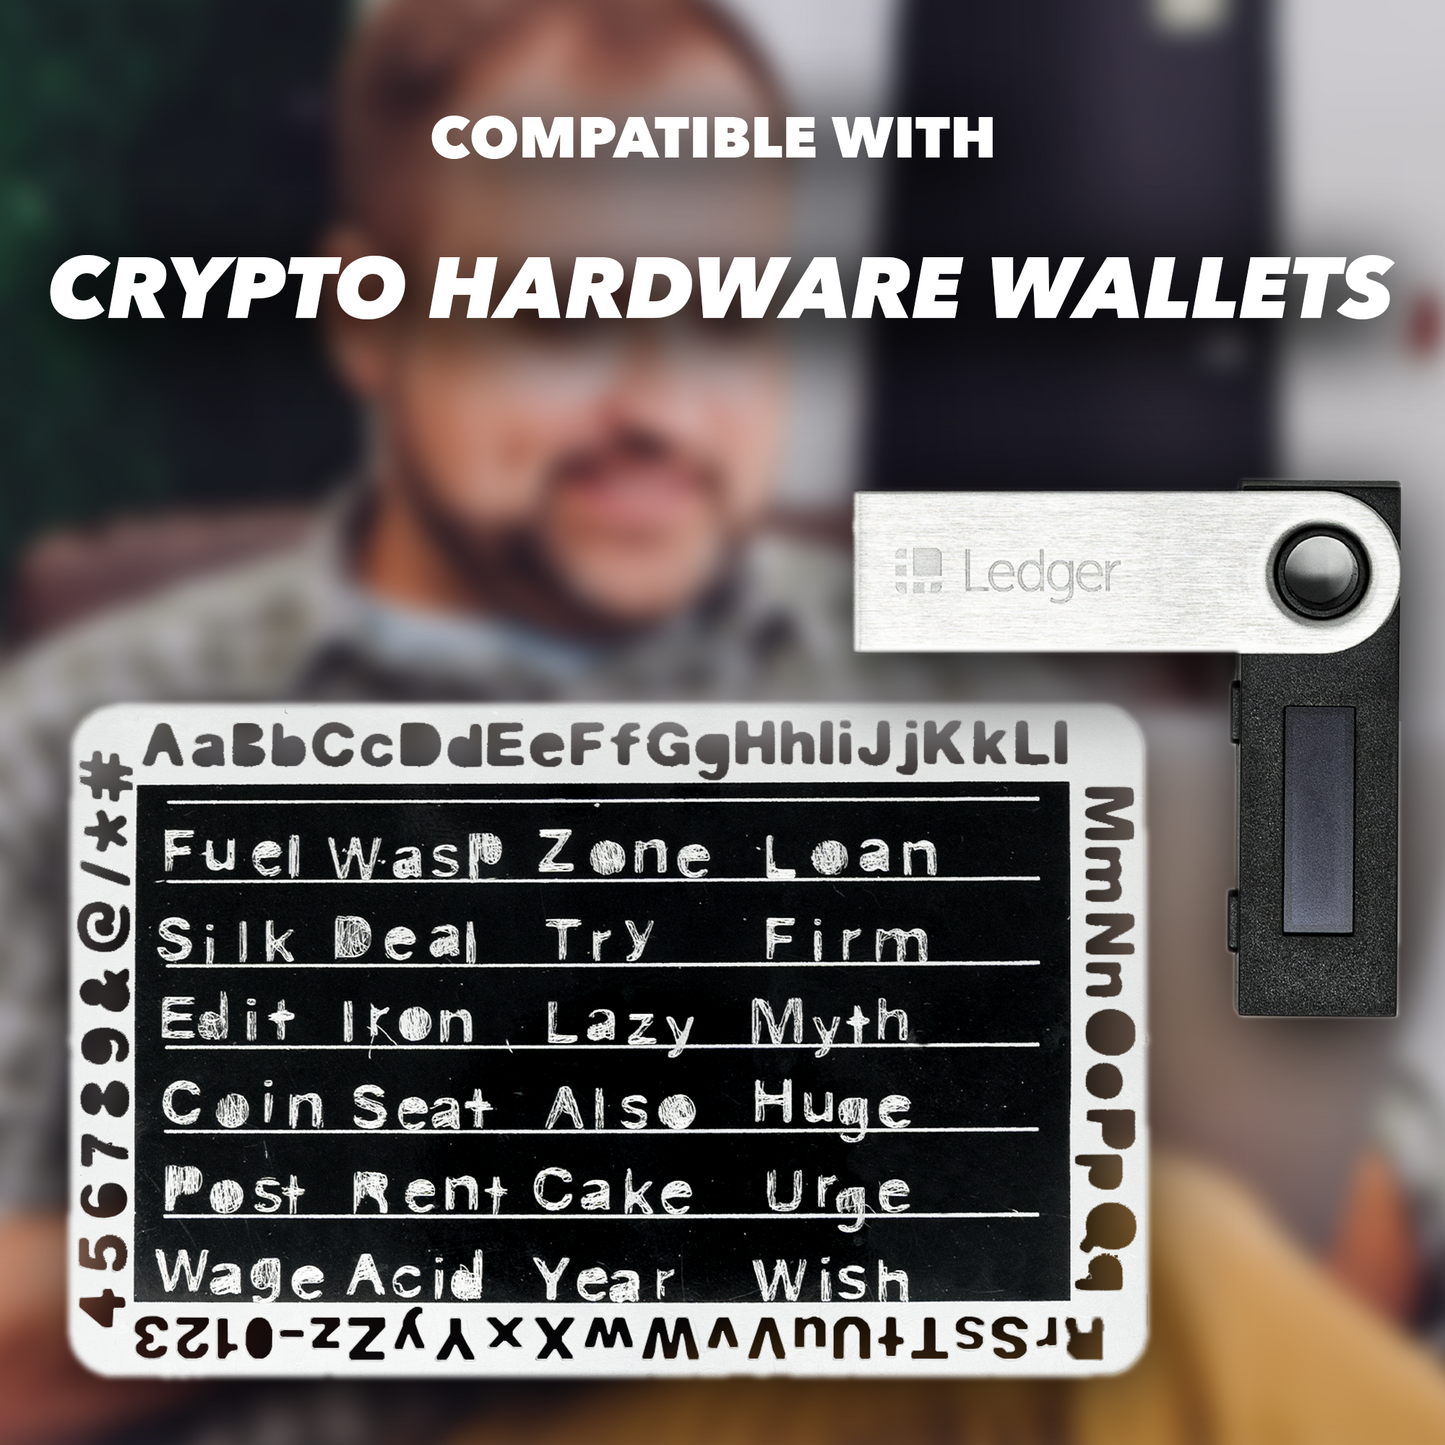 Etch A Pass - Lastpass - 1Password - Master Password - Cold storage wallet crypto - front facing 